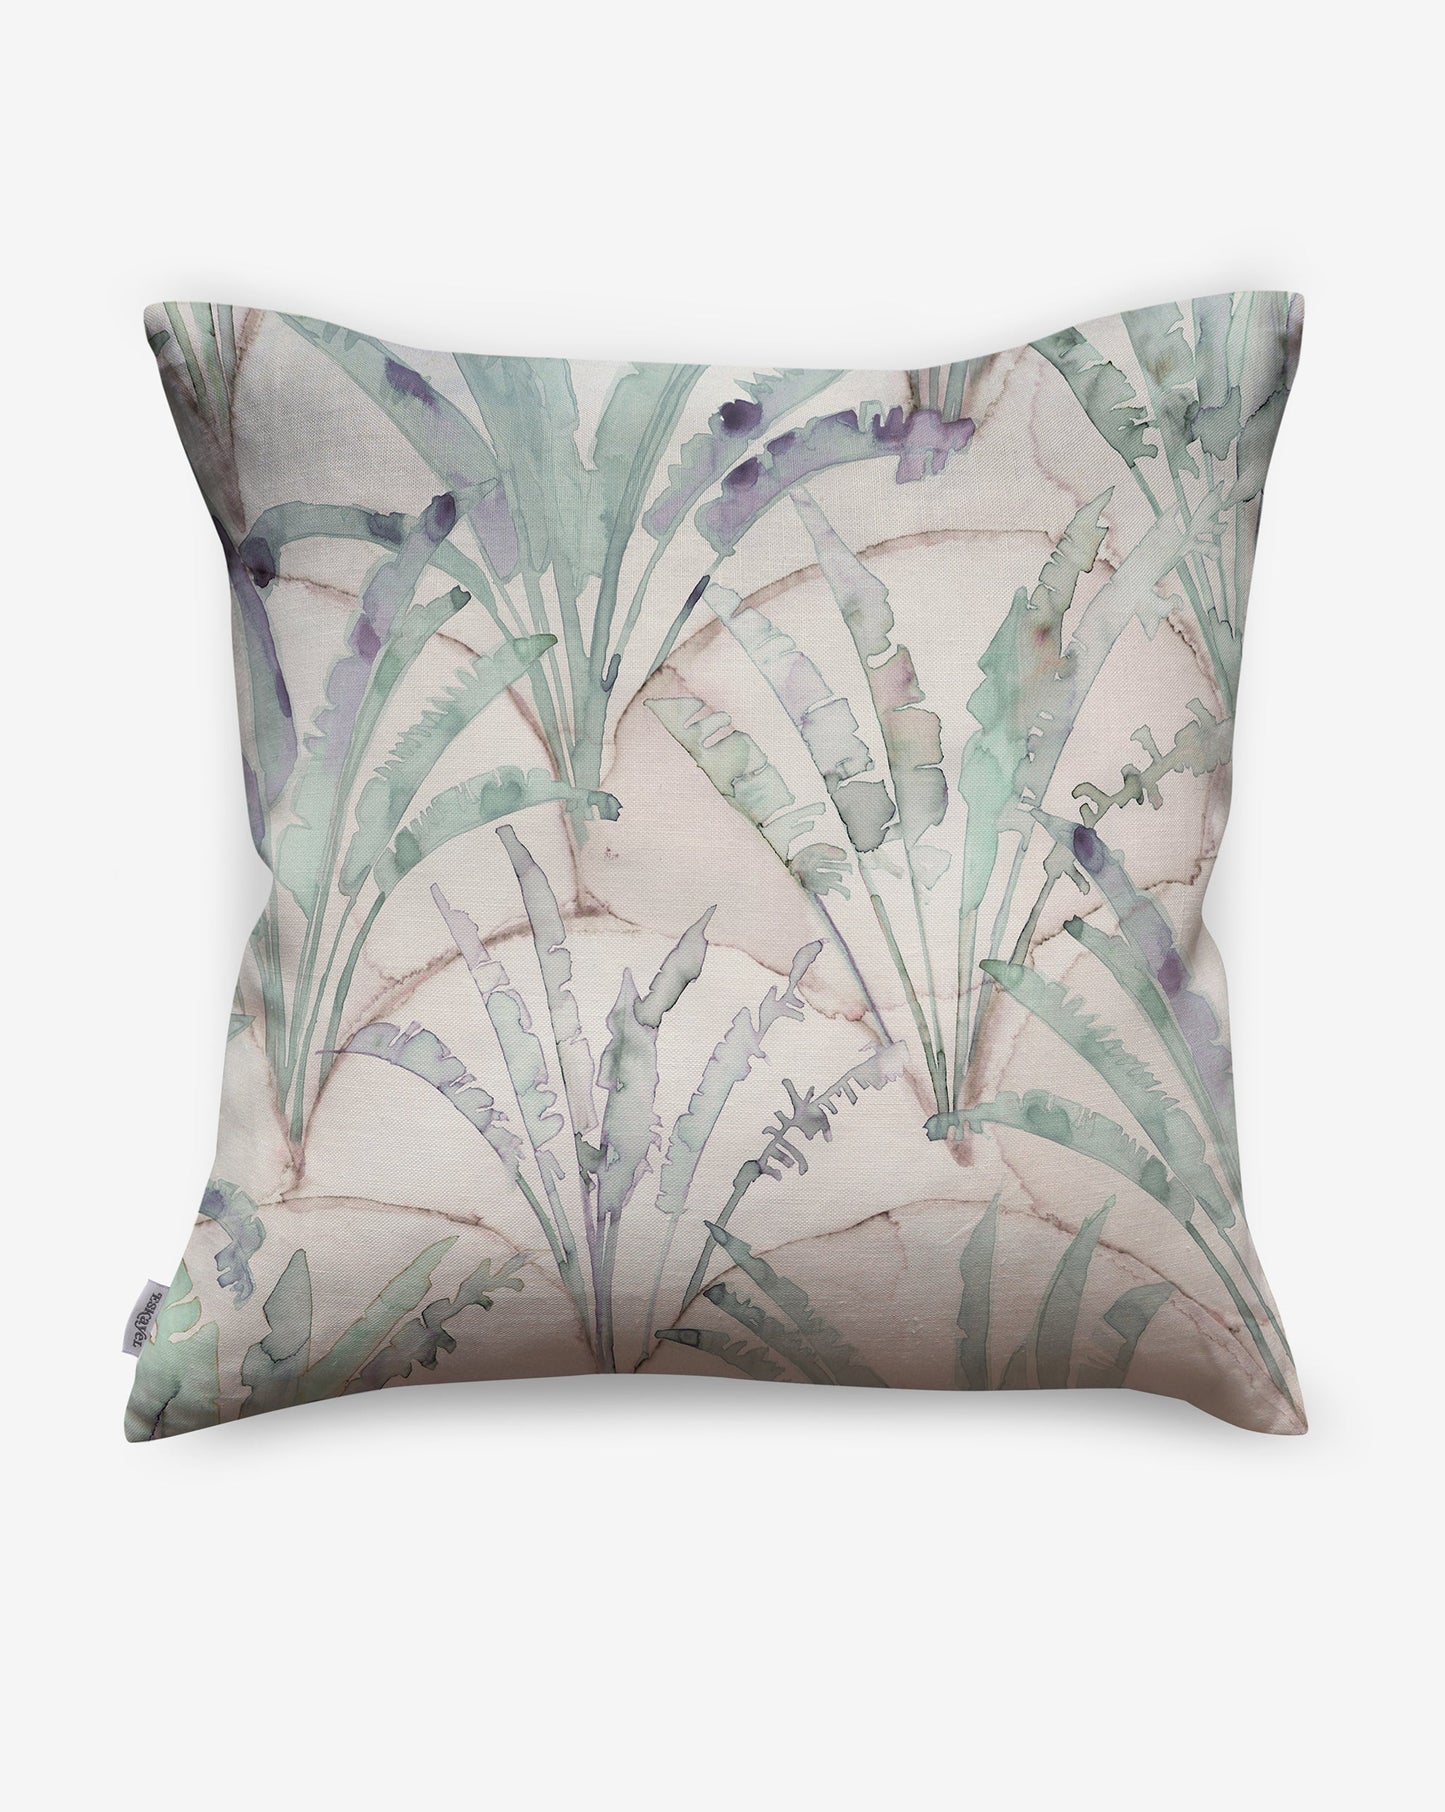 Depicting palms repeated against a scallop background, Travelers Palm pillows in Dusk use a palette of green and beige.